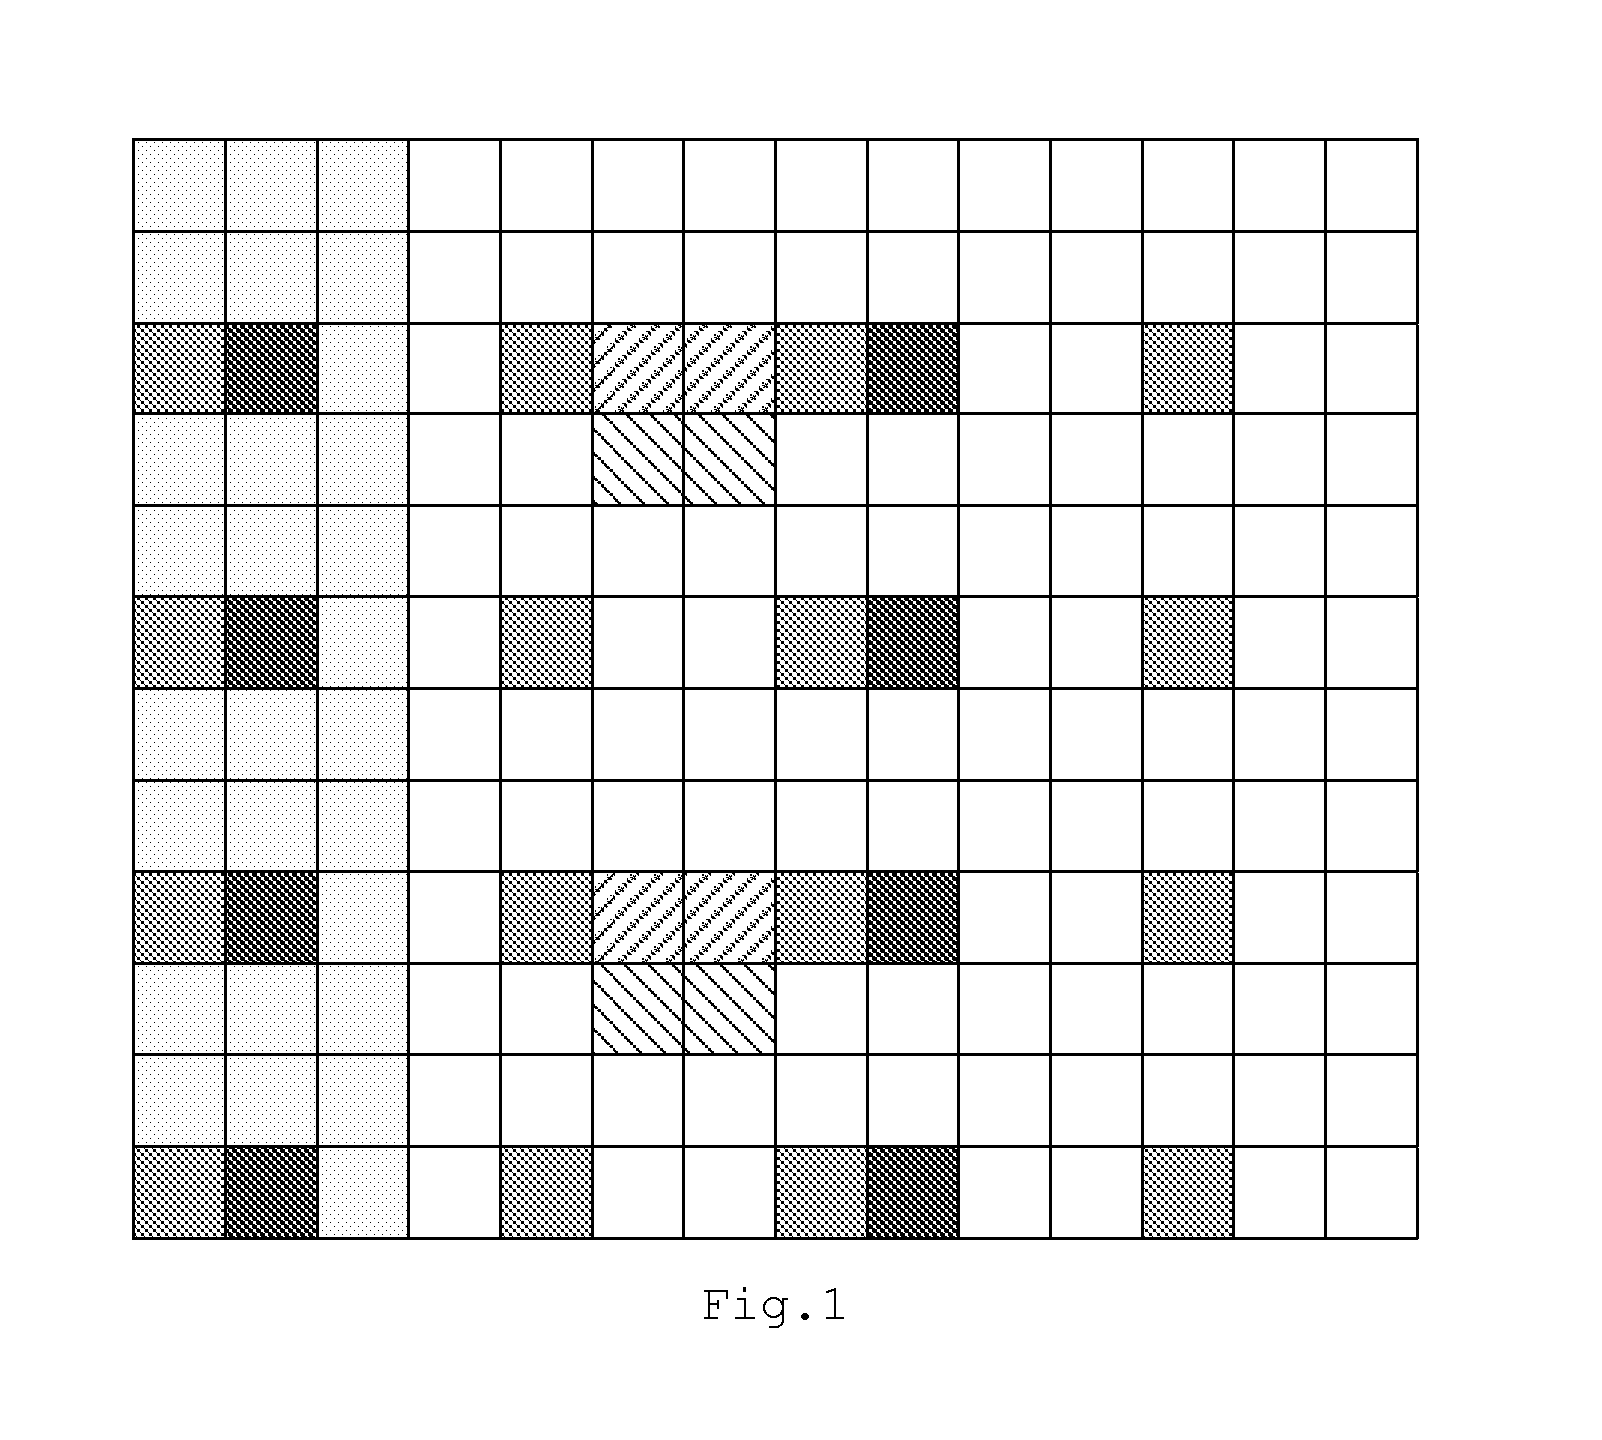 Method of determining a channel state in coordinated multipoint transmission